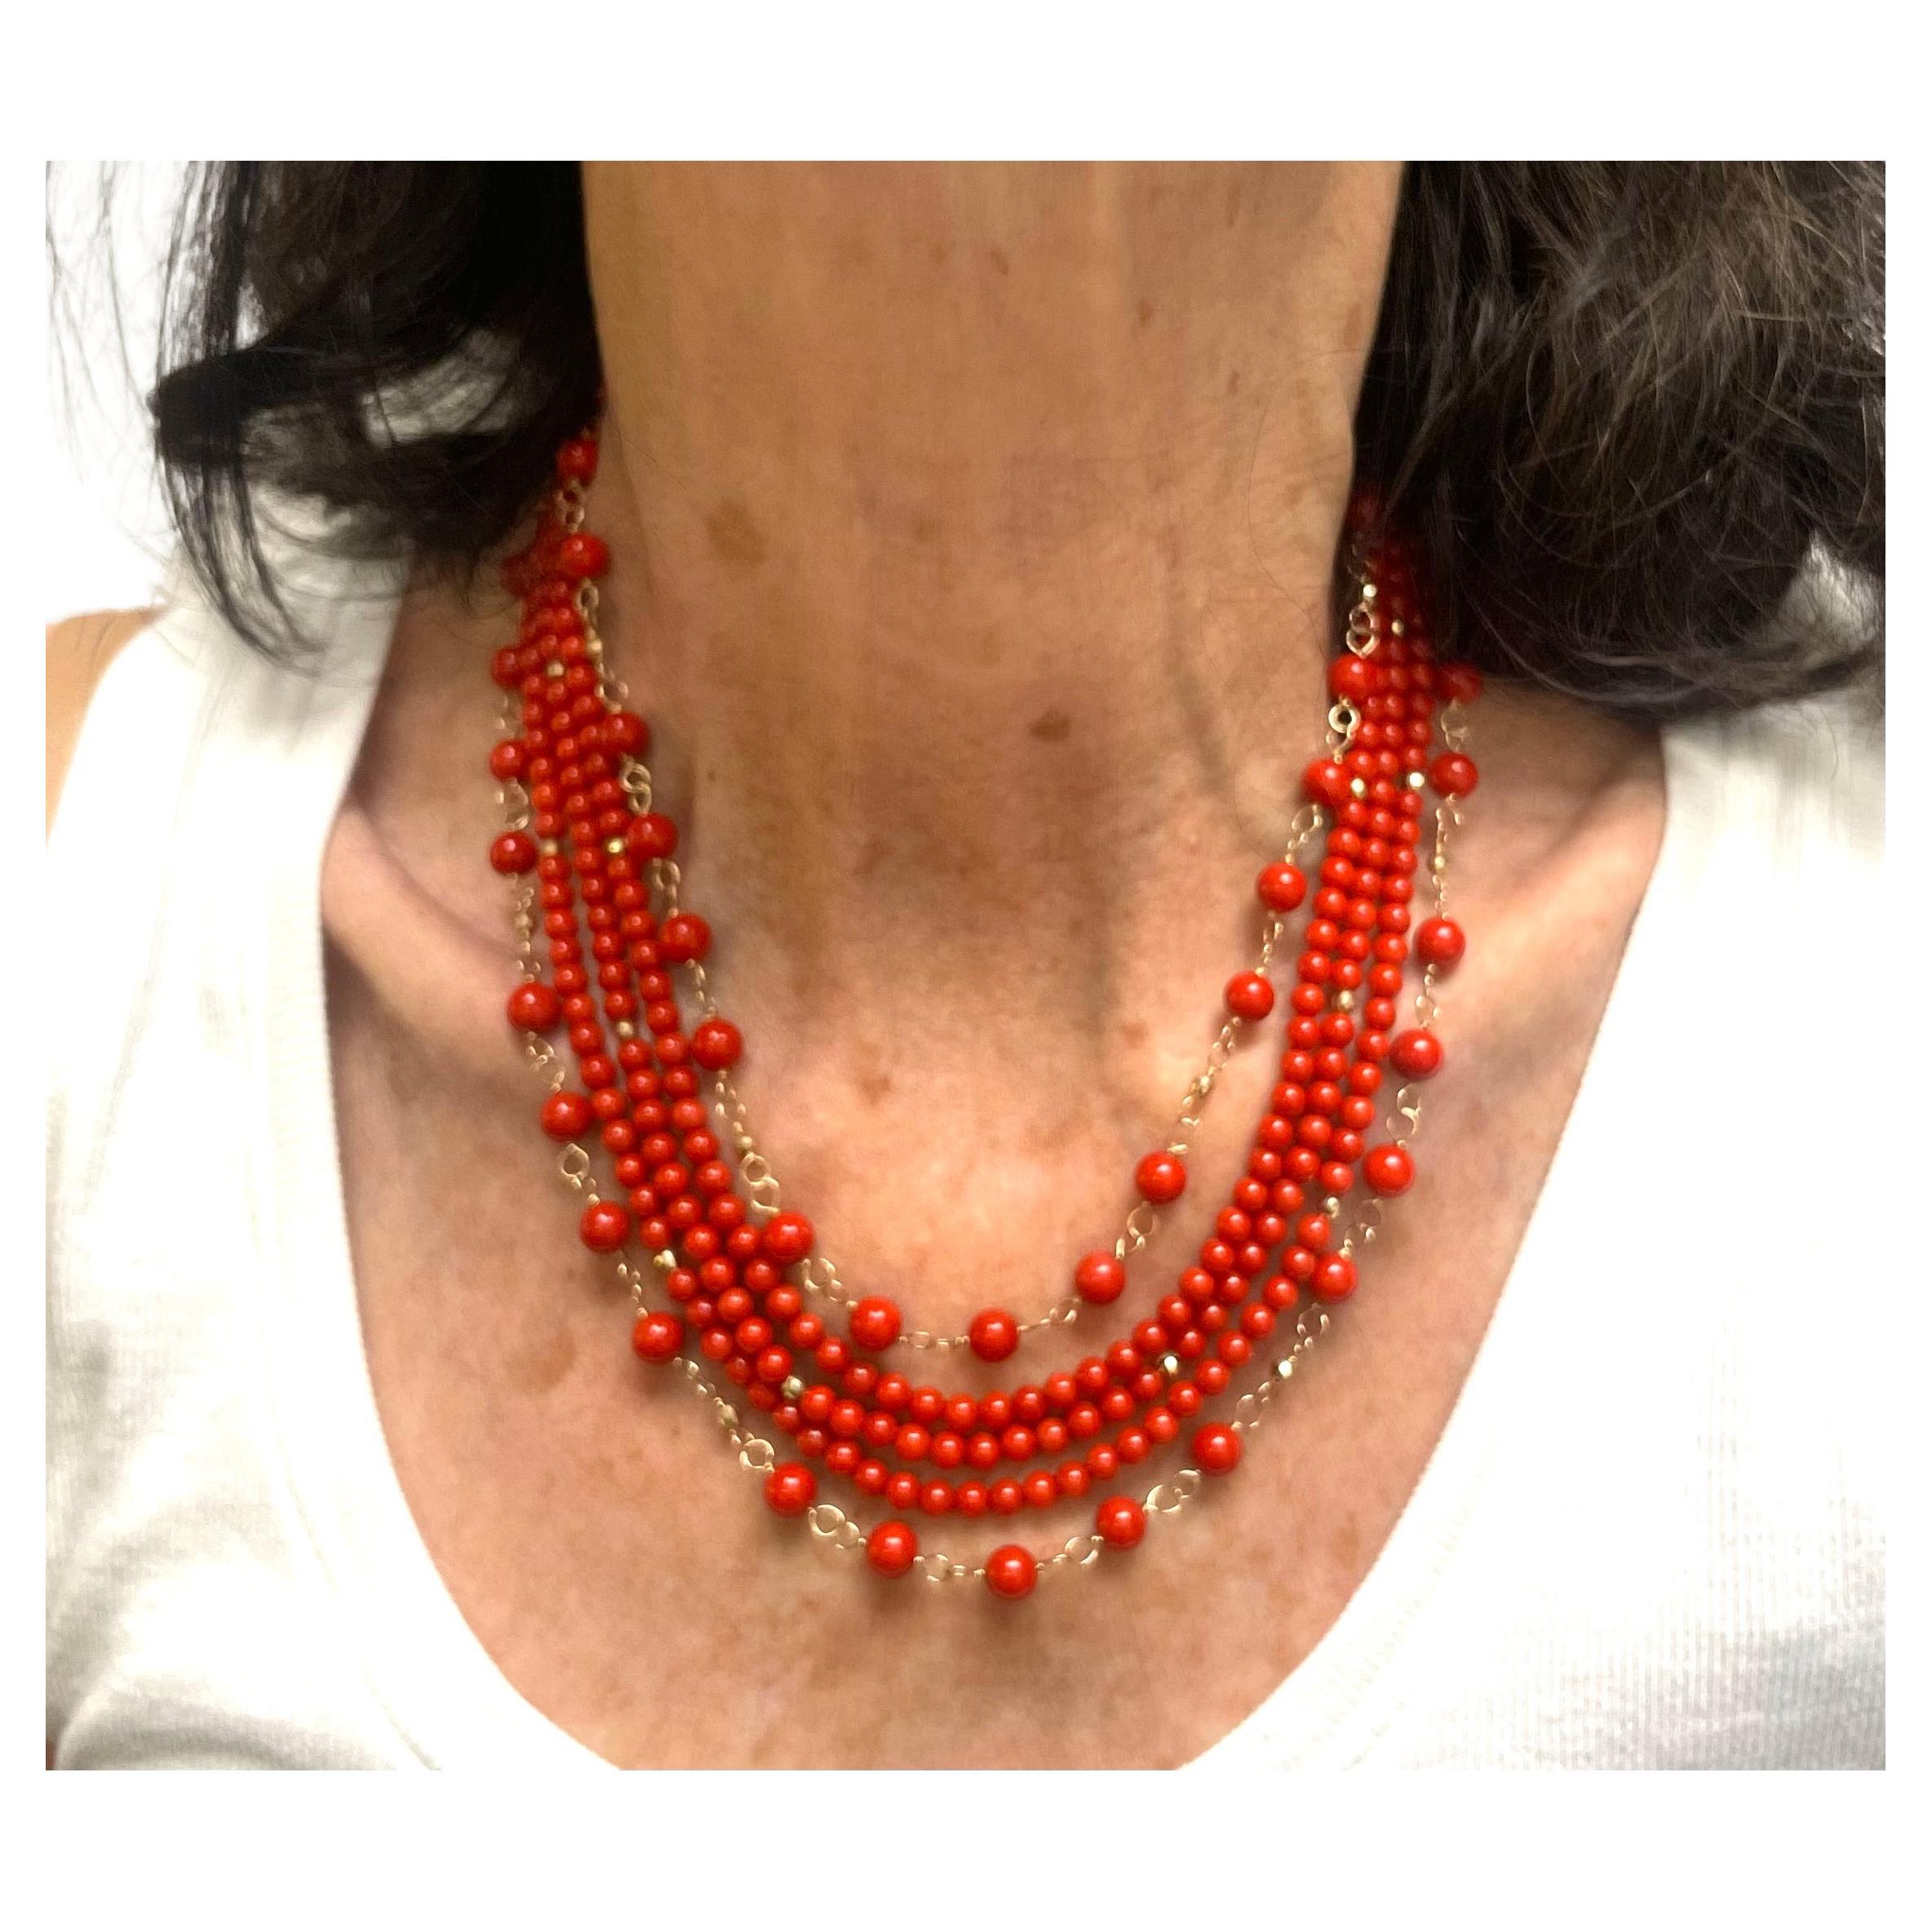 Description
This vibrant and happy five strand Coral necklace doesn’t go unnoticed. The mix of hand wire-wrapped and classically strung Coral strands, combined with scattered 14k gold faceted balls, makes a feminine and elegant statement. 
Item #